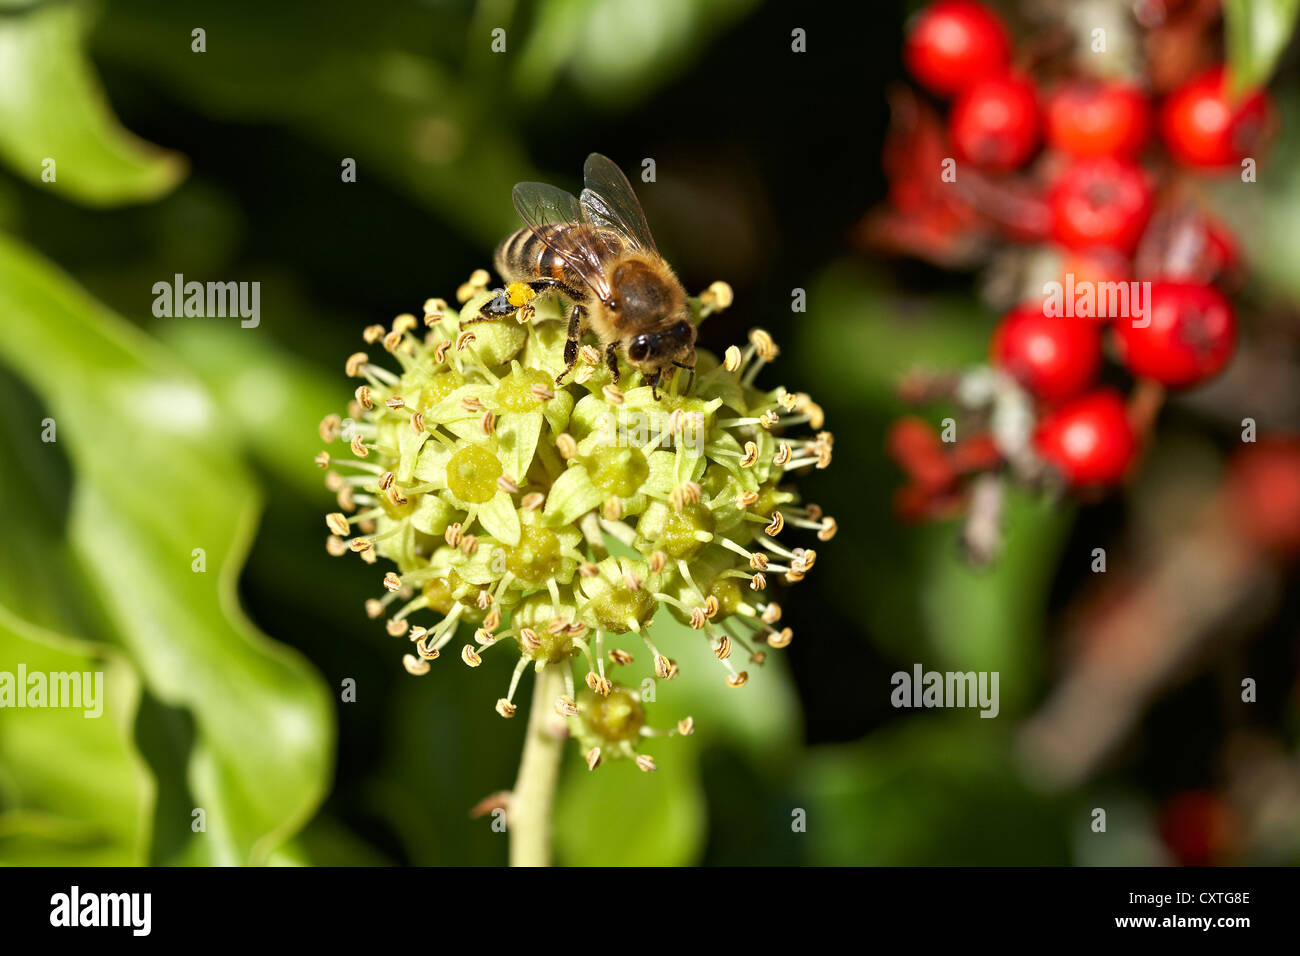 Worker Honey Bee Apis Mellifera foraging for Pollen and Nectar from flower of English Ivy Hedera Helix. Yellow Pollen grains on Stock Photo